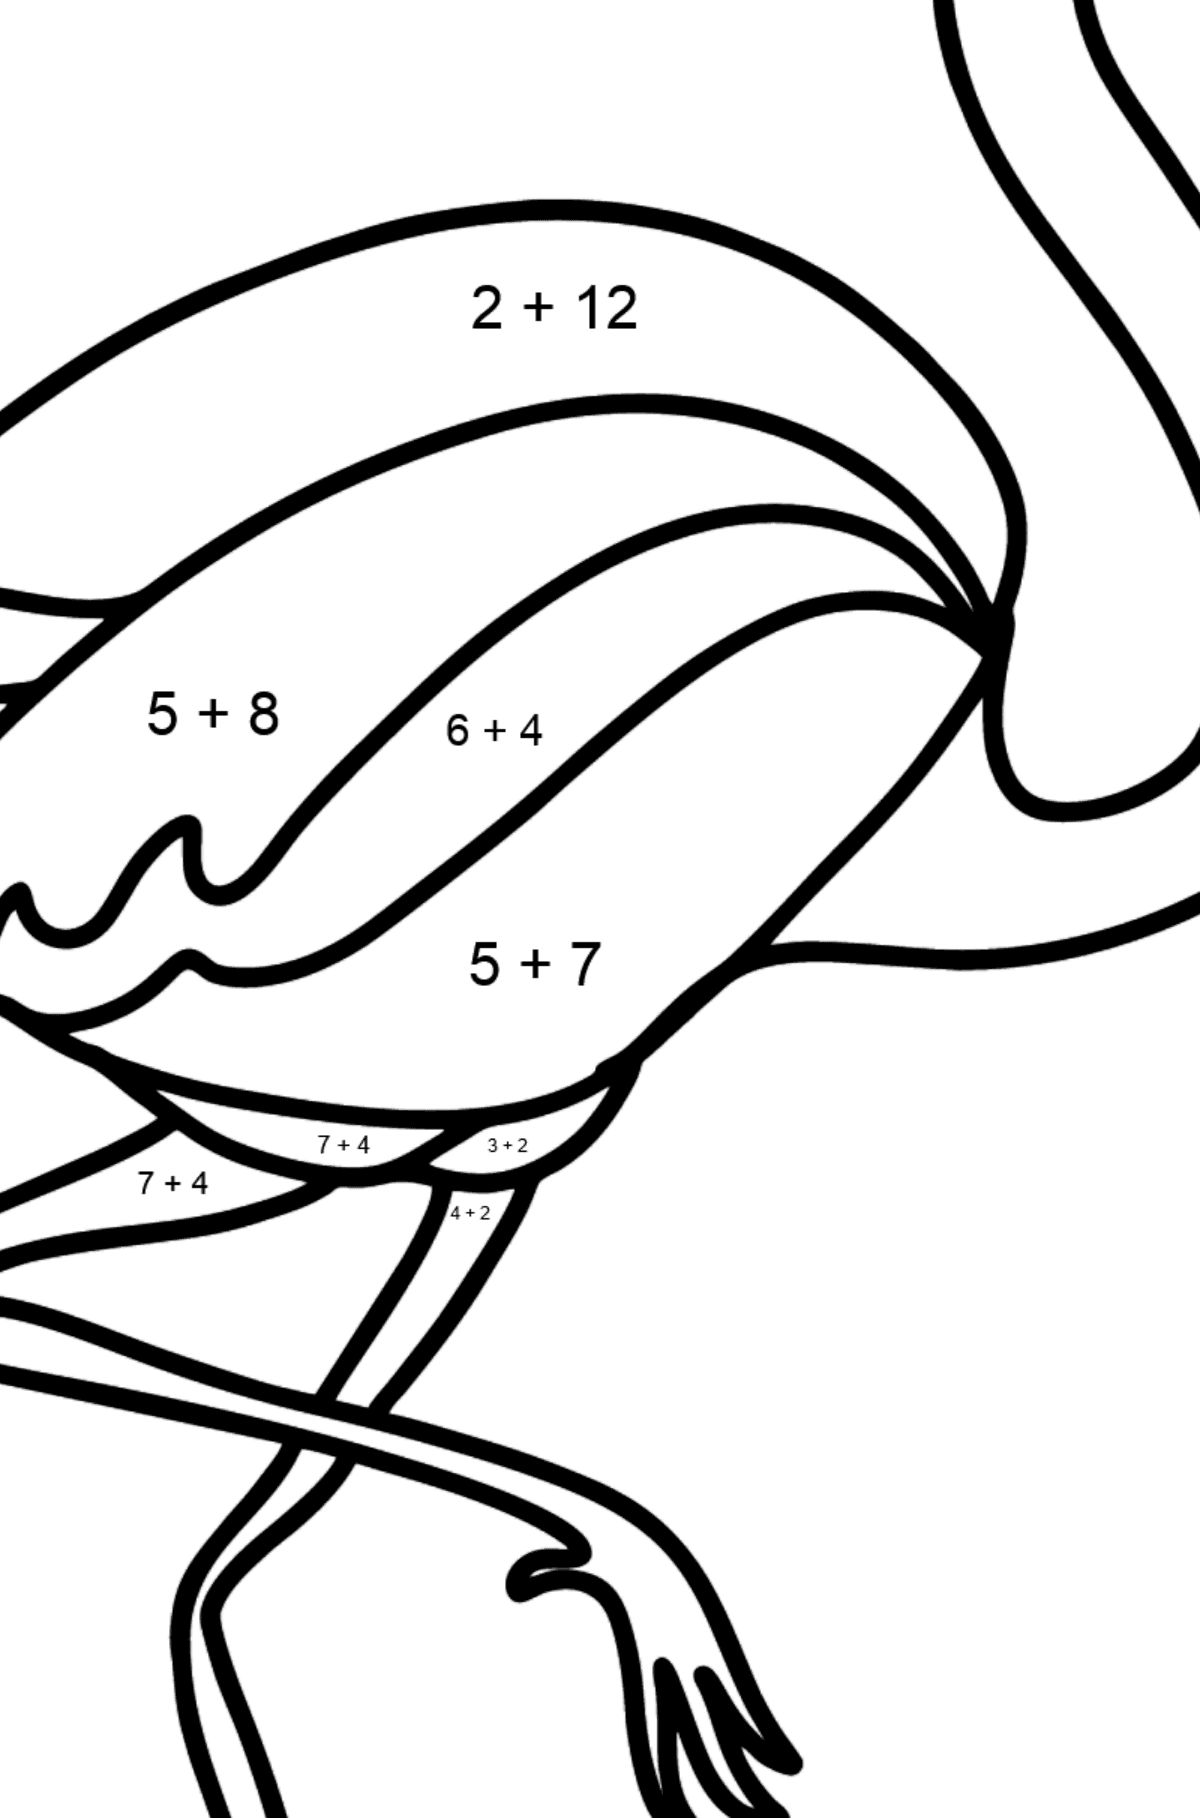 Flamingo coloring page - Math Coloring - Addition for Kids